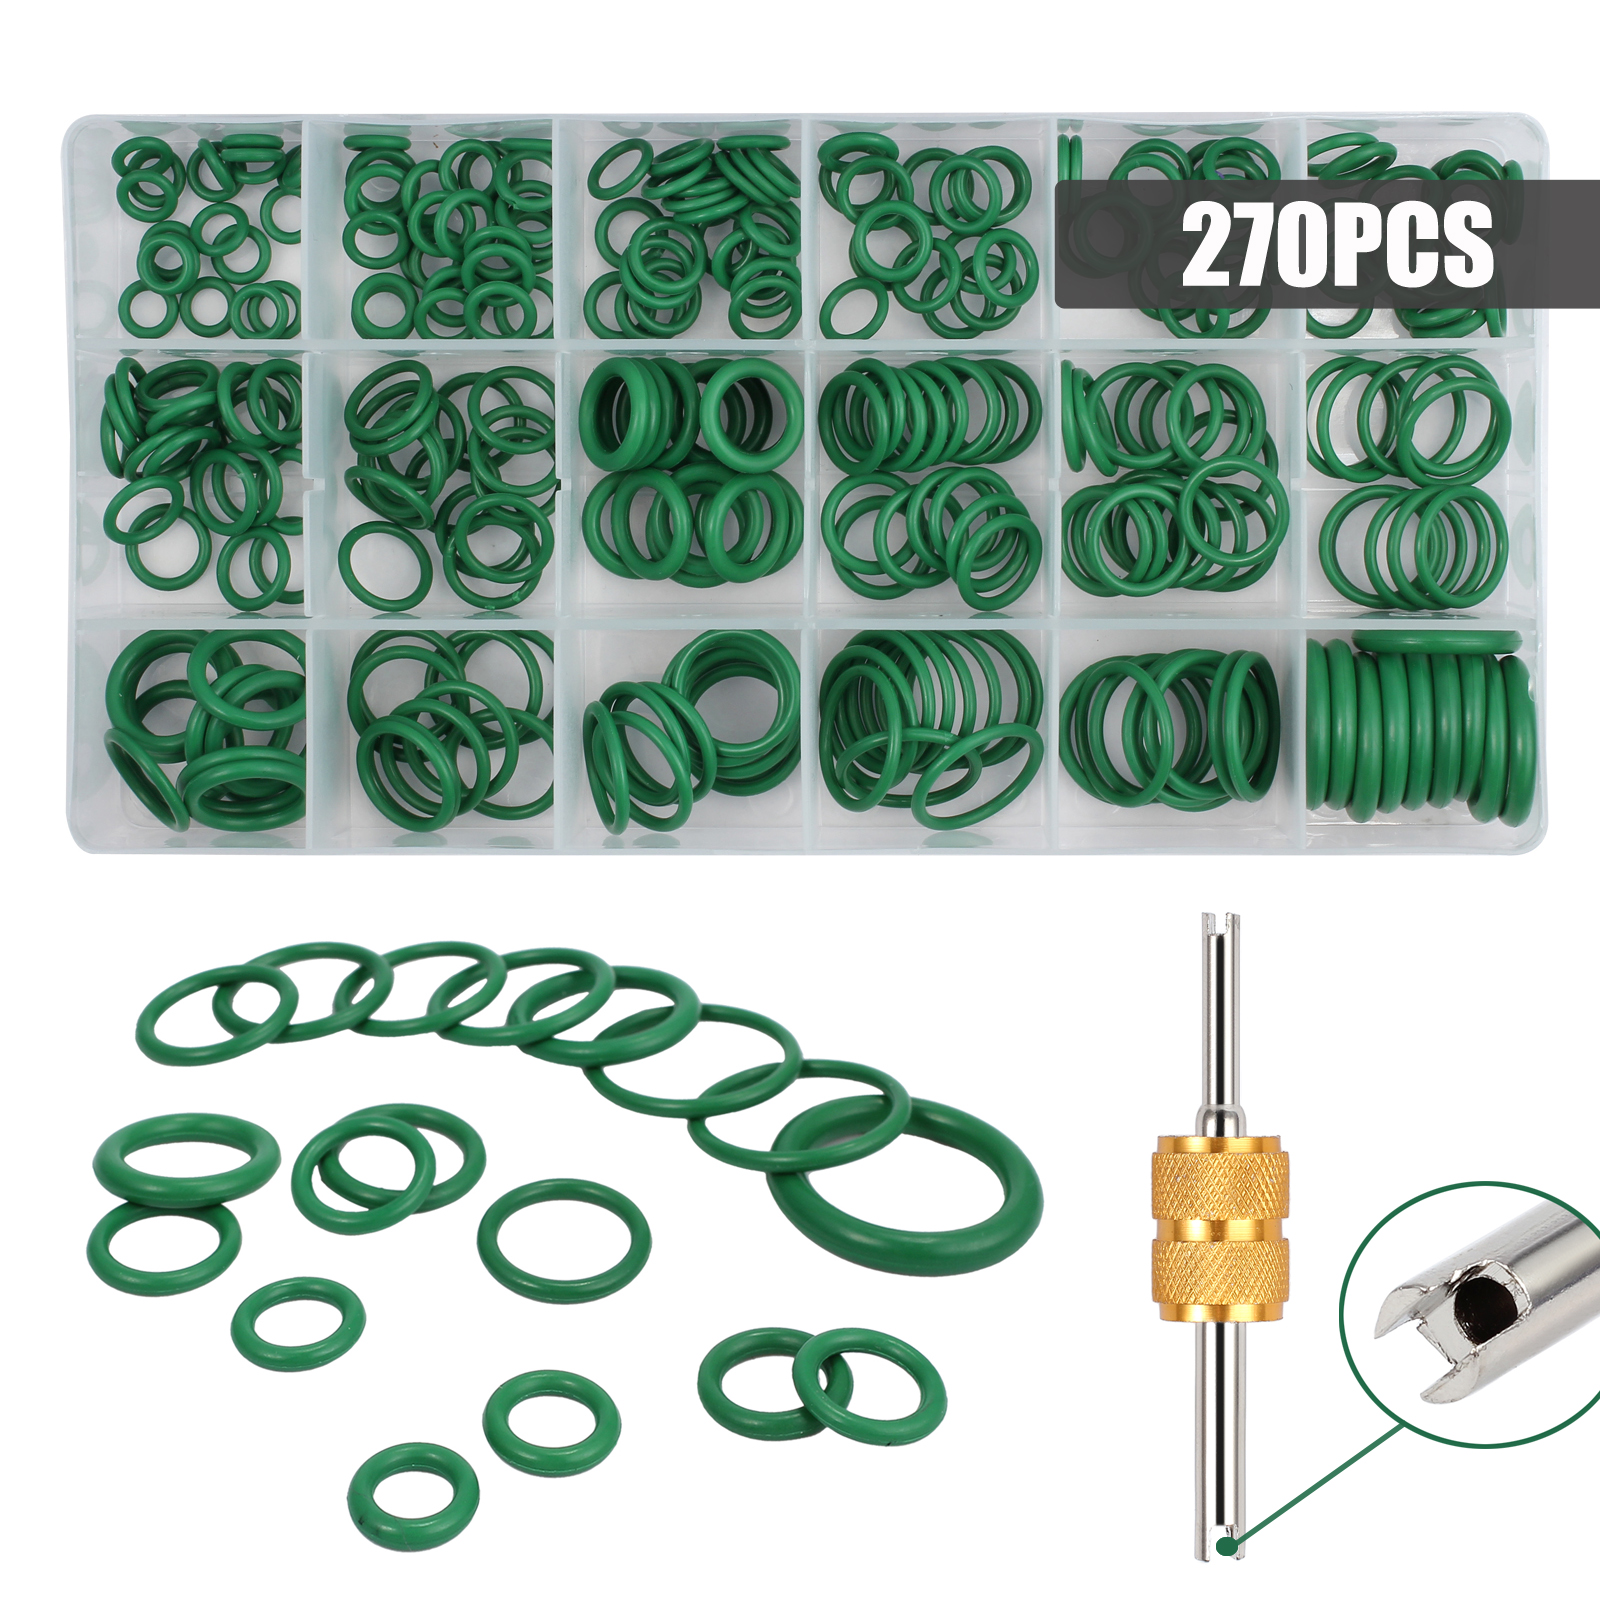 270PCS O Ring Assortment Kit 18 Sizes A/C System Air Conditioning HNBR